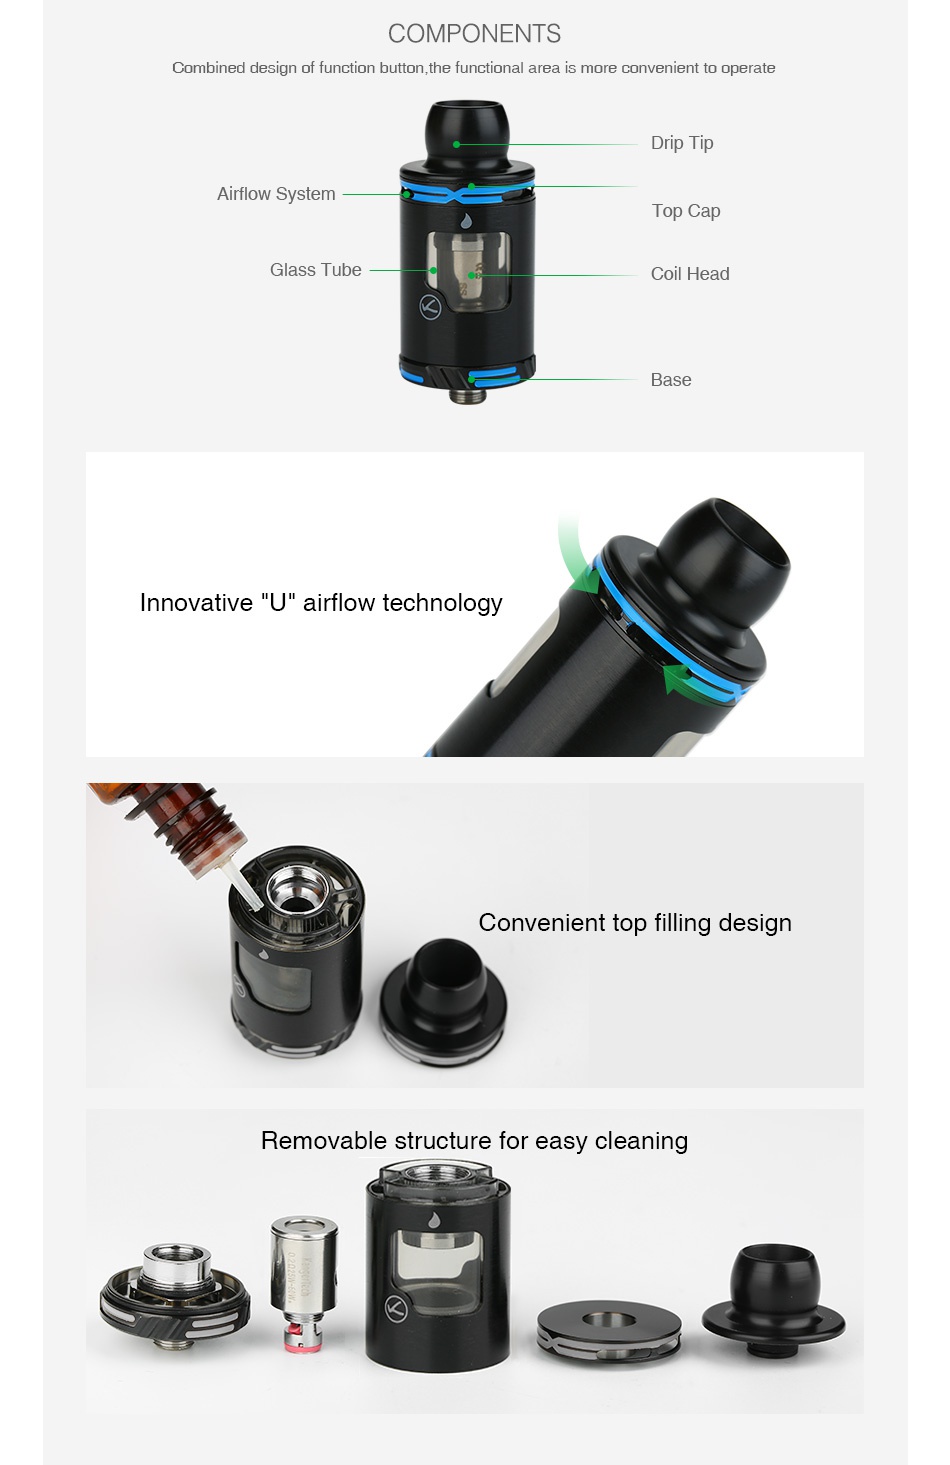 Kangertech IKEN Tank 4ml COMPONENTS Combined design of function button  the functional area is more convenient to operate Drip II Airflow System Glass Tube Coil head Base Innovative U airflow technology Convenient top filling design Removable structure for easy cleaning aD